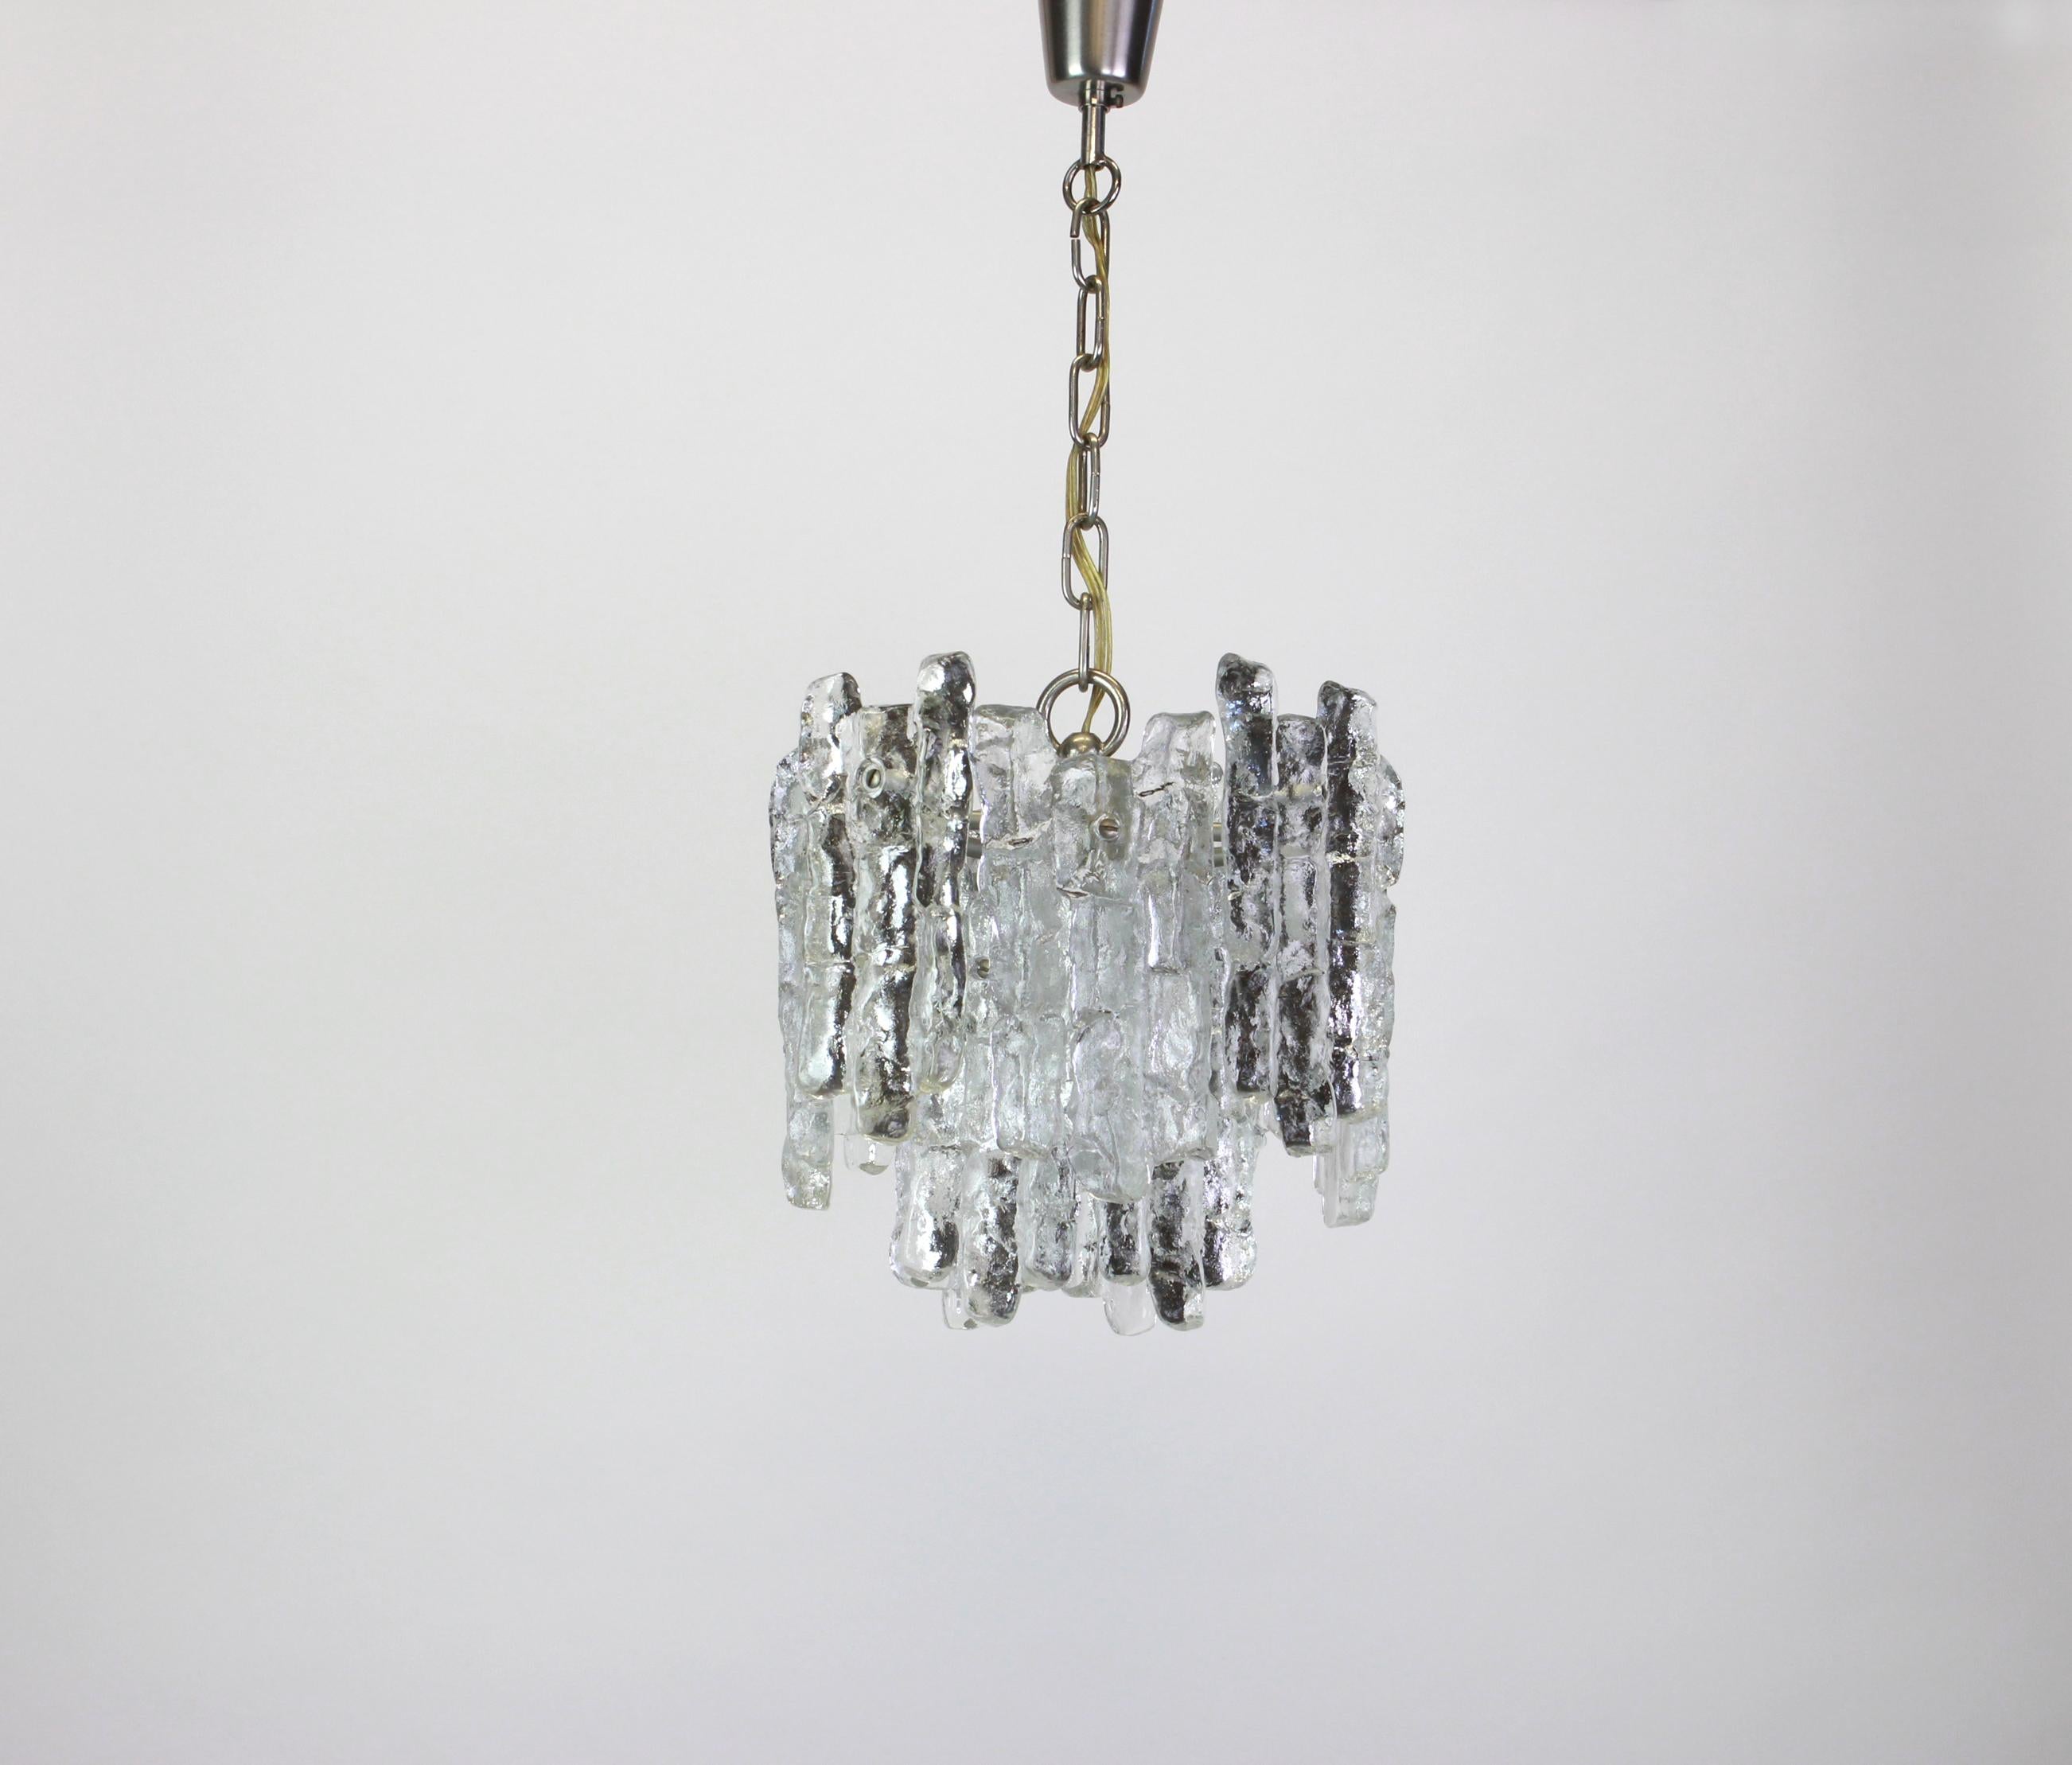 Stunning pair of Murano glass pendants by Kalmar, 1960s
Two tiers structure gathering 12 structured glasses, beautifully refracting the light very heavy quality.

Heavy quality and in very good condition. Cleaned, well-wired and ready to use. 

The